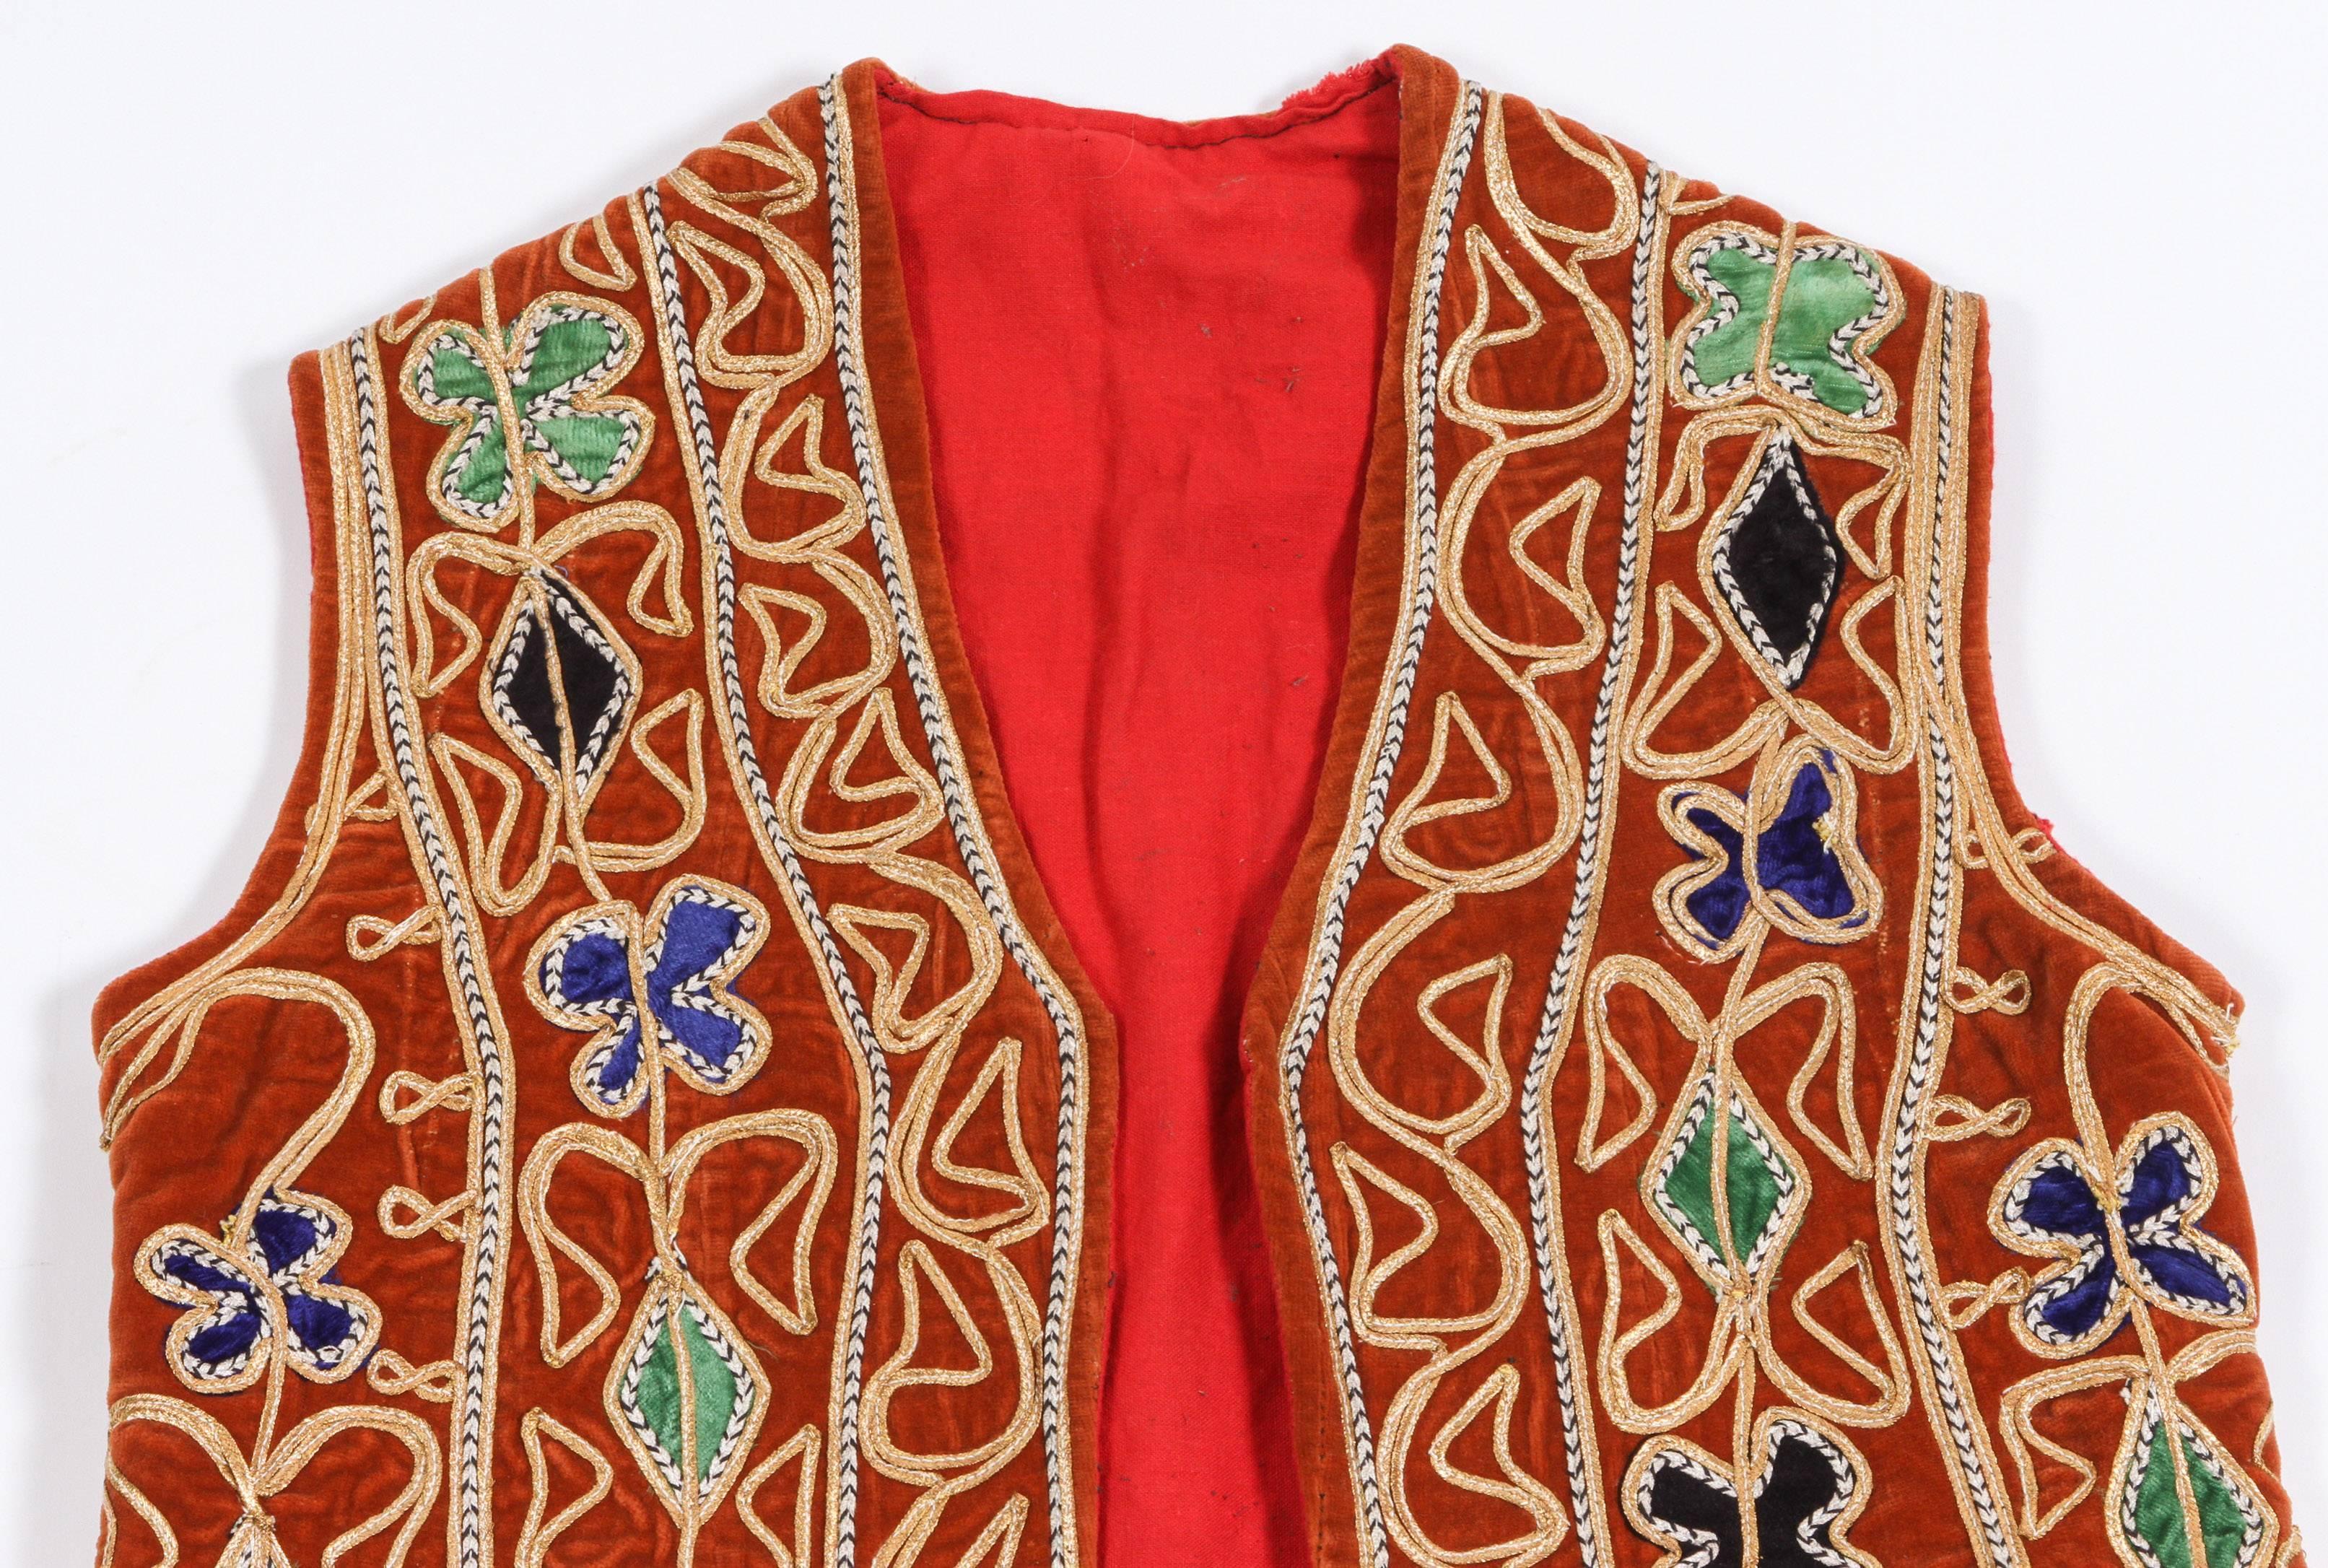 Vintage Turkish vest brightly colored embroidered design of geometric patterns against a red ground. 
Turkish ethnic folk costume.
The designs on the open vintage Turkish jacket are hand embroidered.
Measures: 29 in, height
18 in. underarm
22in. 